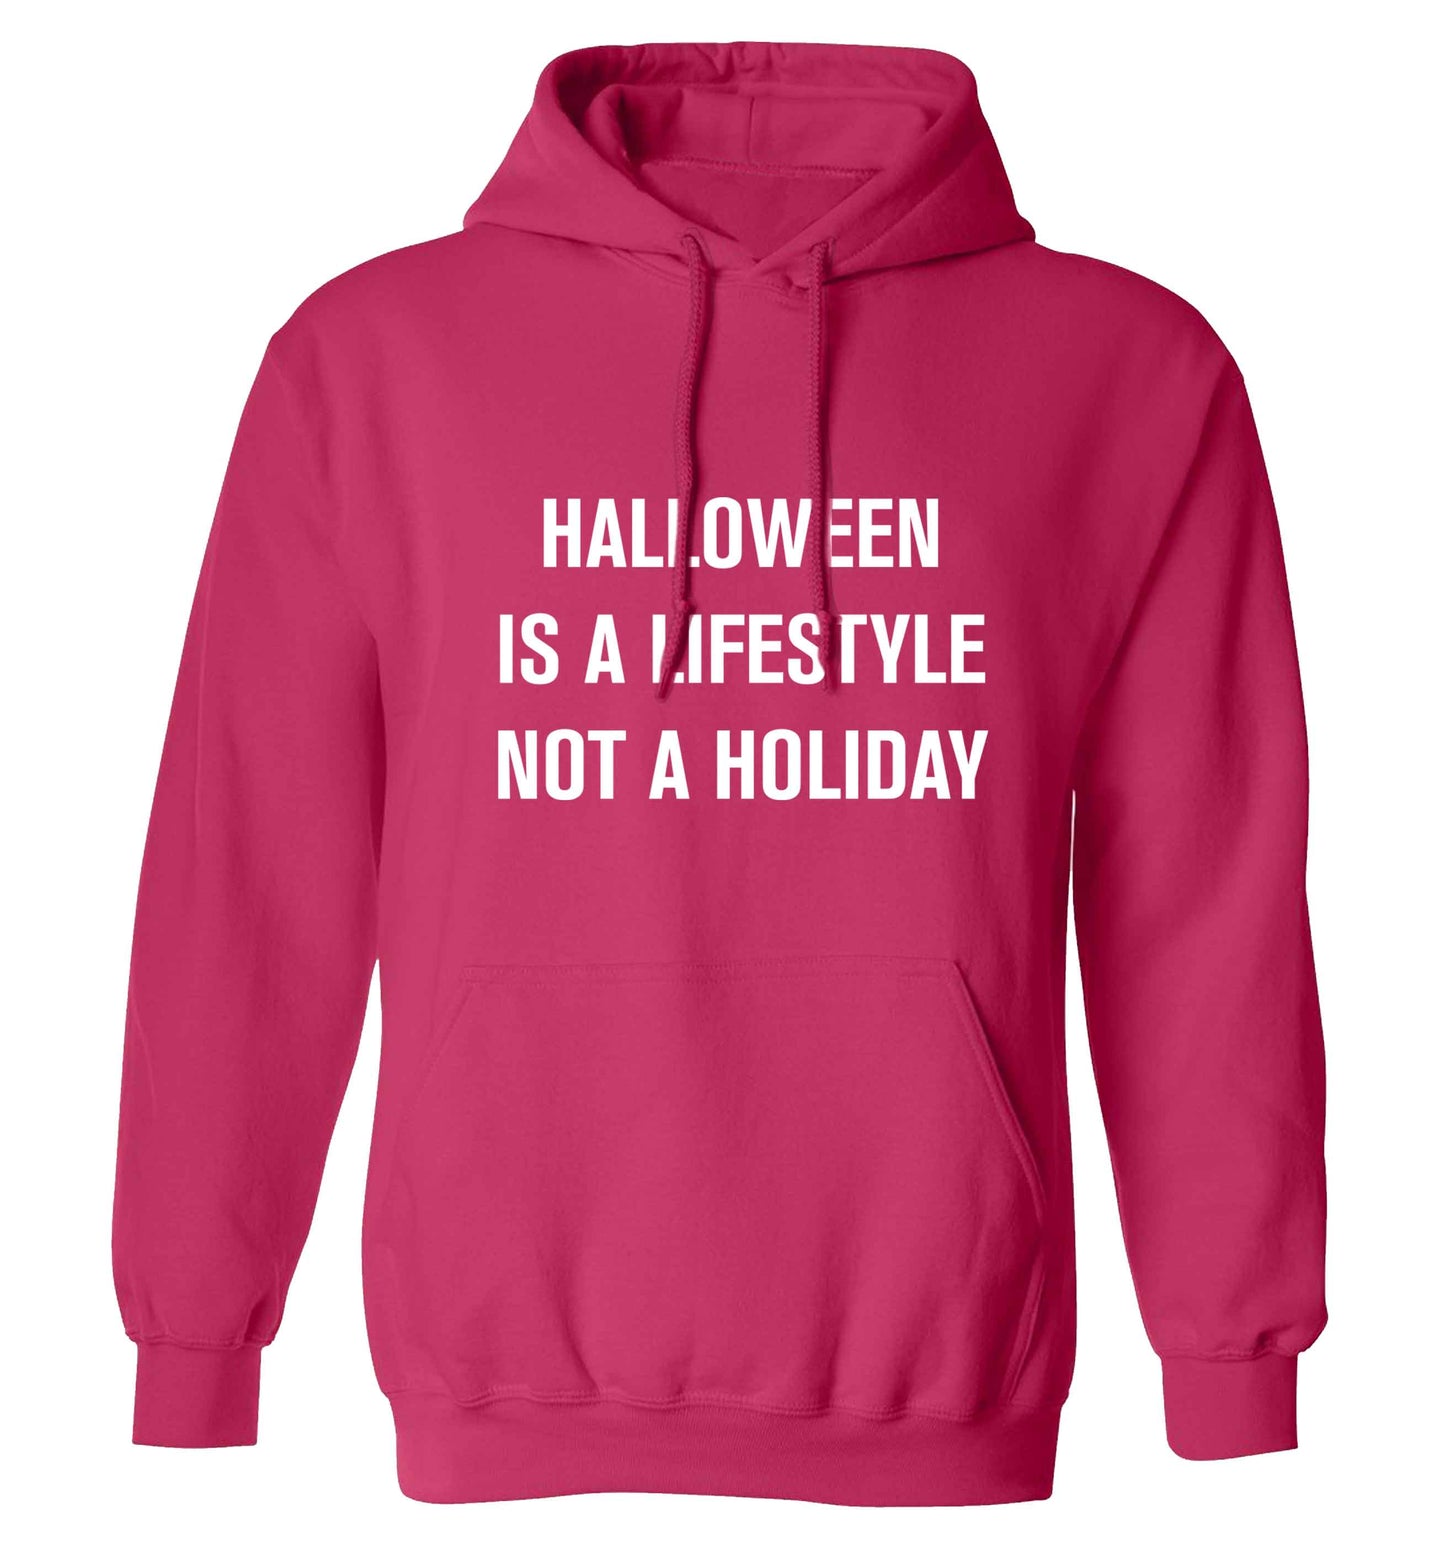 Halloween is a lifestyle not a holiday adults unisex pink hoodie 2XL